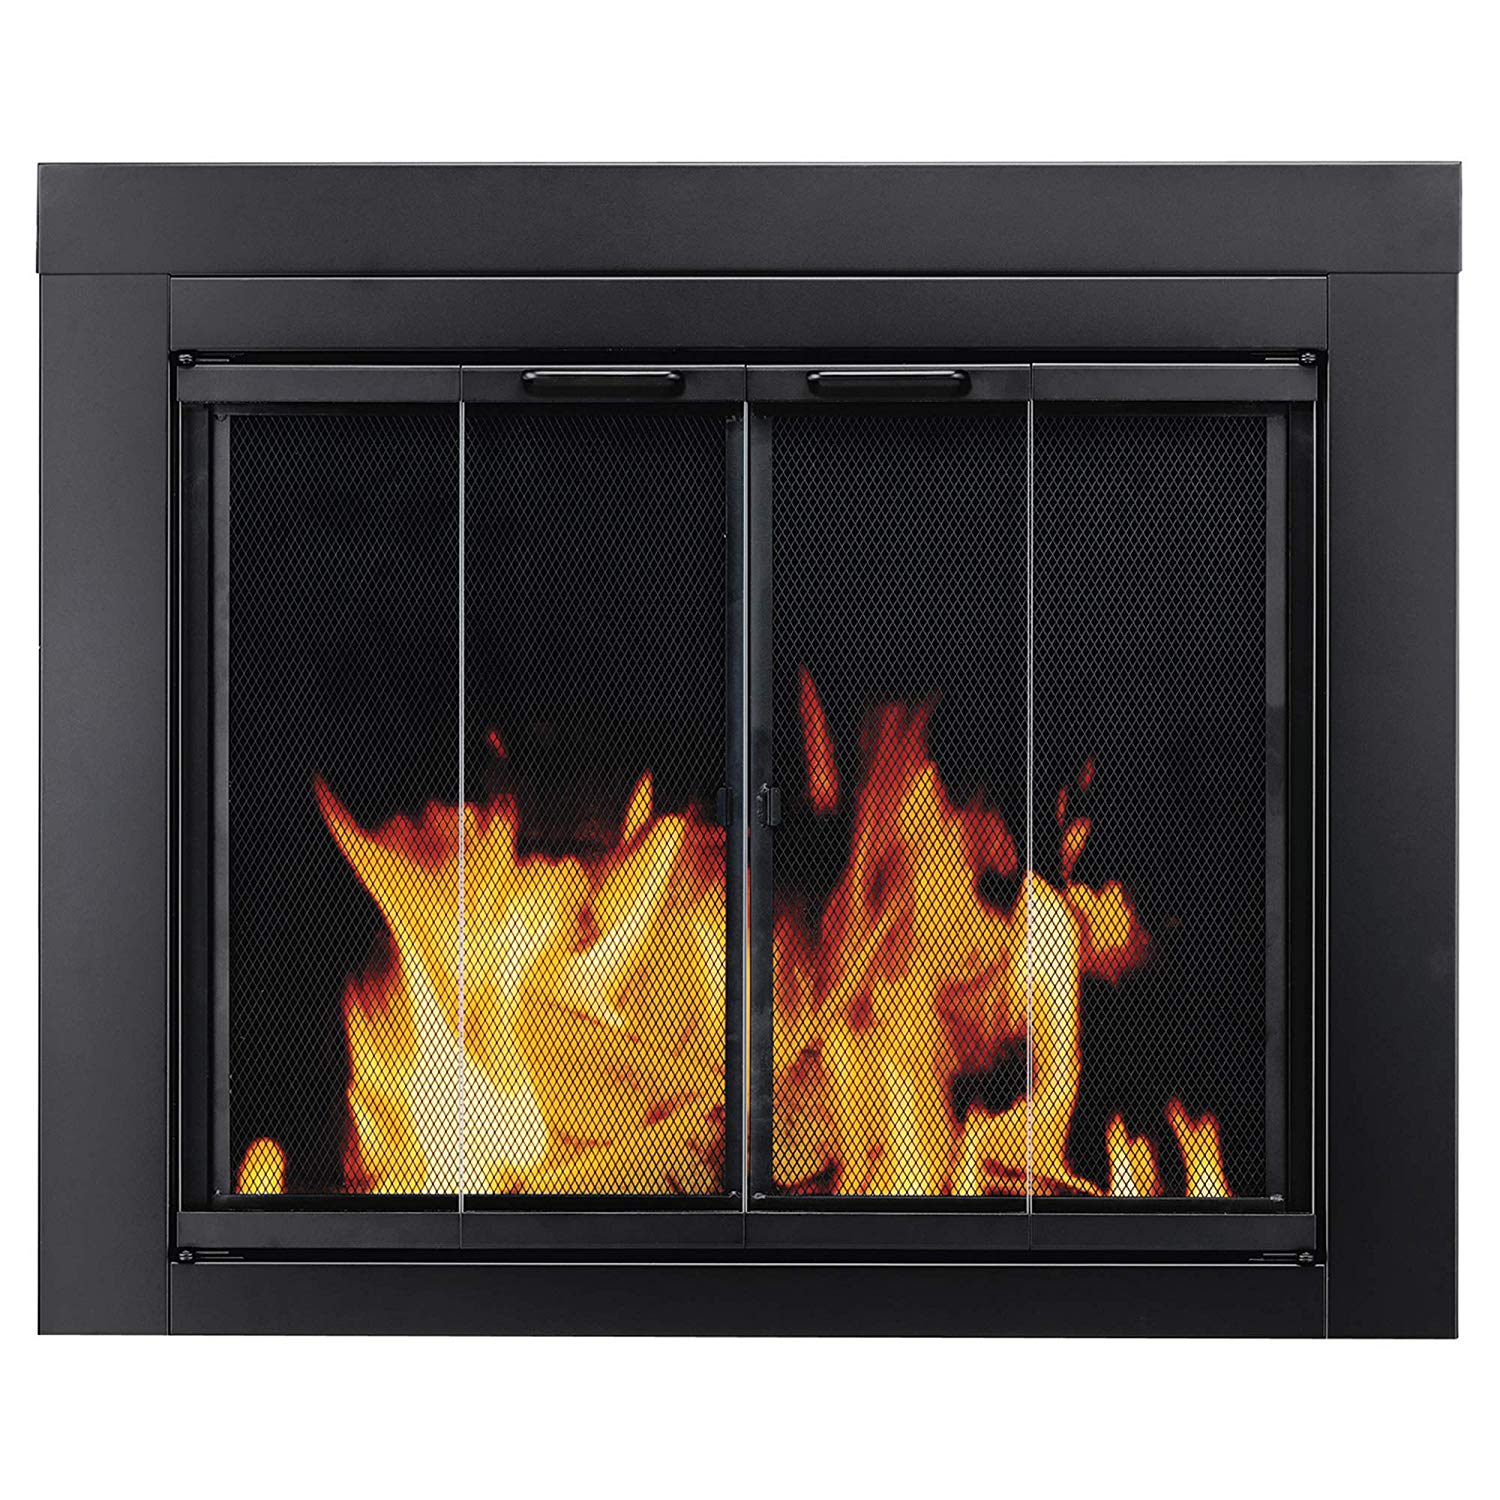 Wood for Fireplace New Pleasant Hearth at 1000 ascot Fireplace Glass Door Black Small